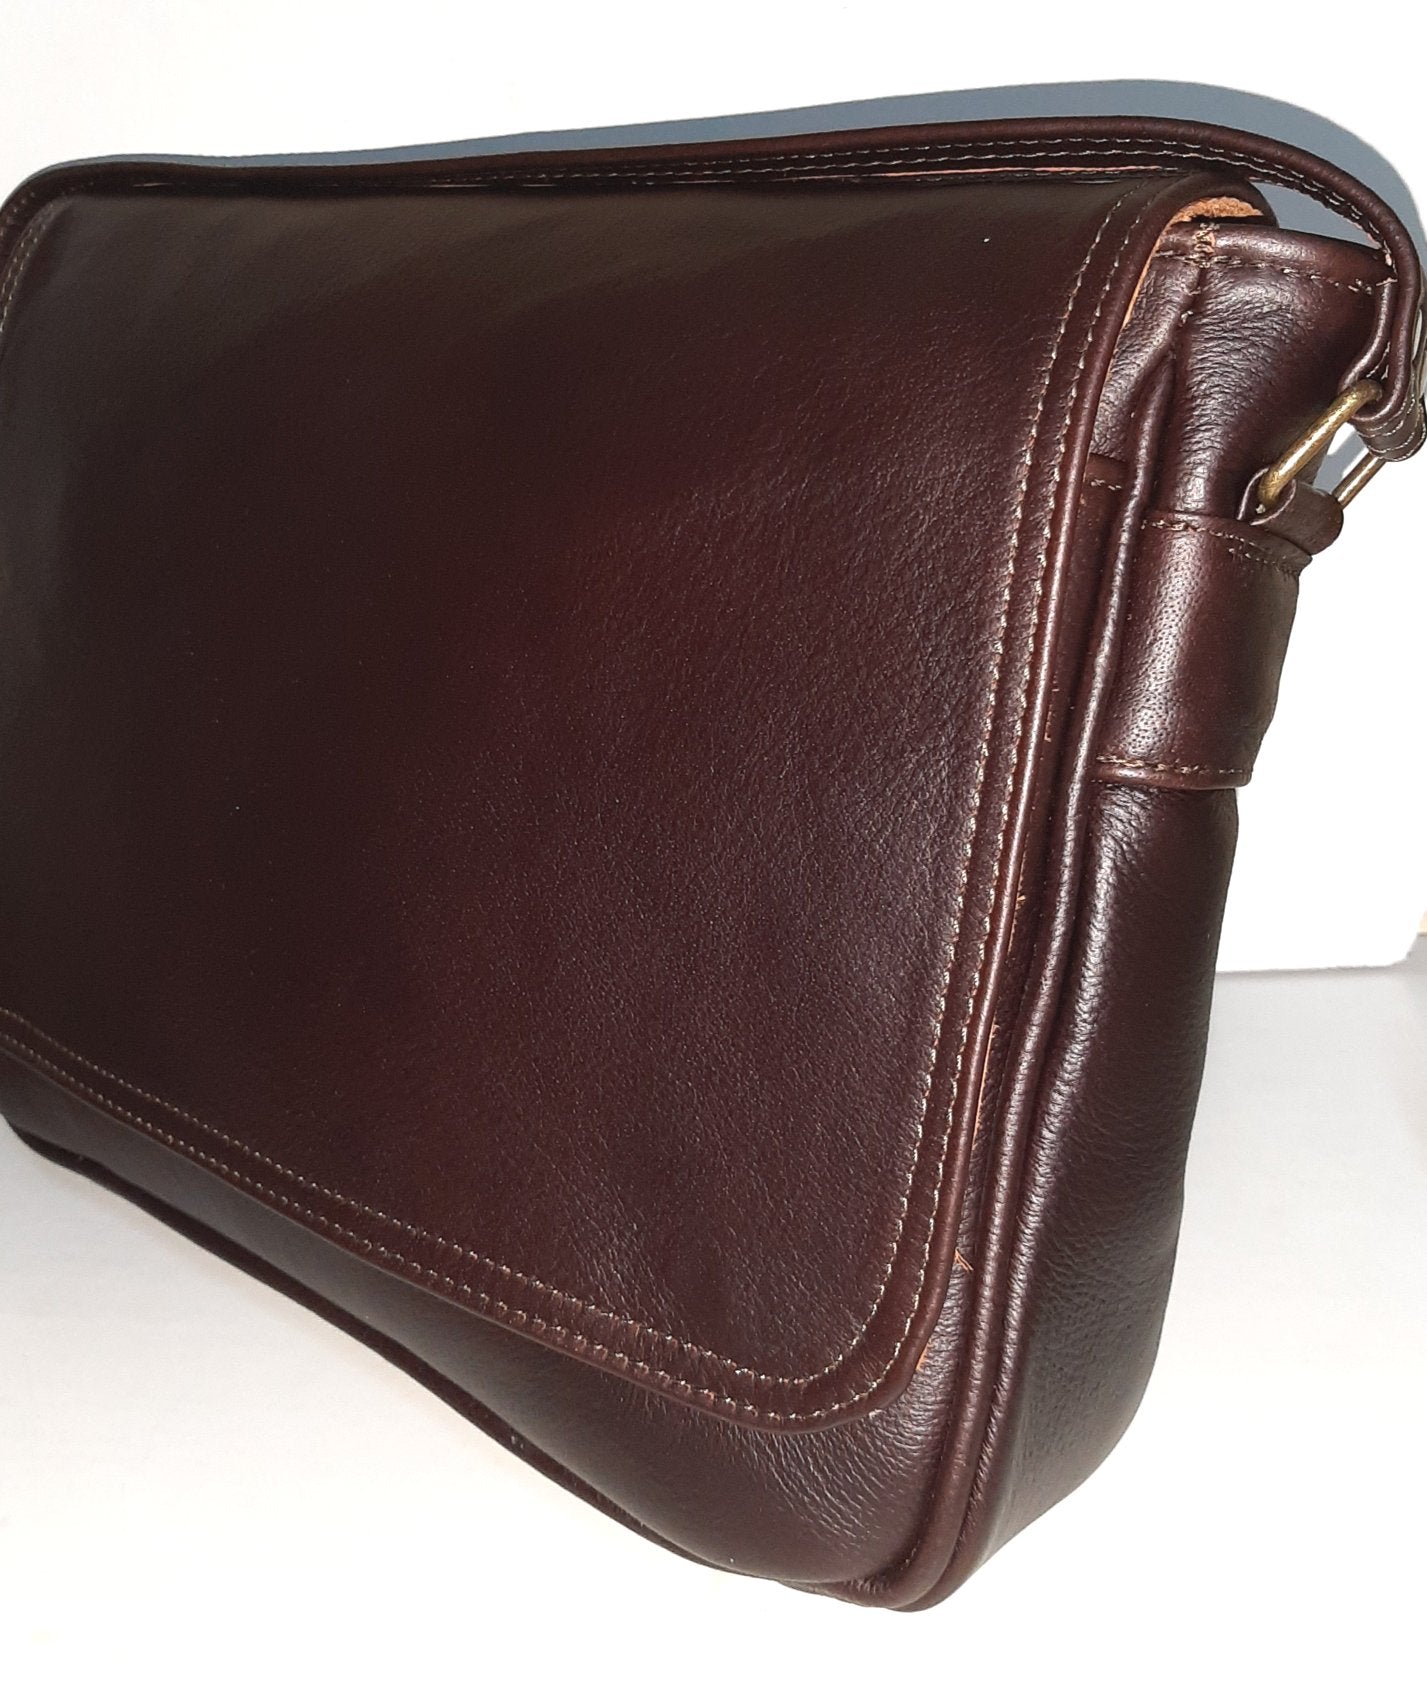 Men's laptop bags 13 - 14 inches  in dark tan colour made by  cape Masai leather 